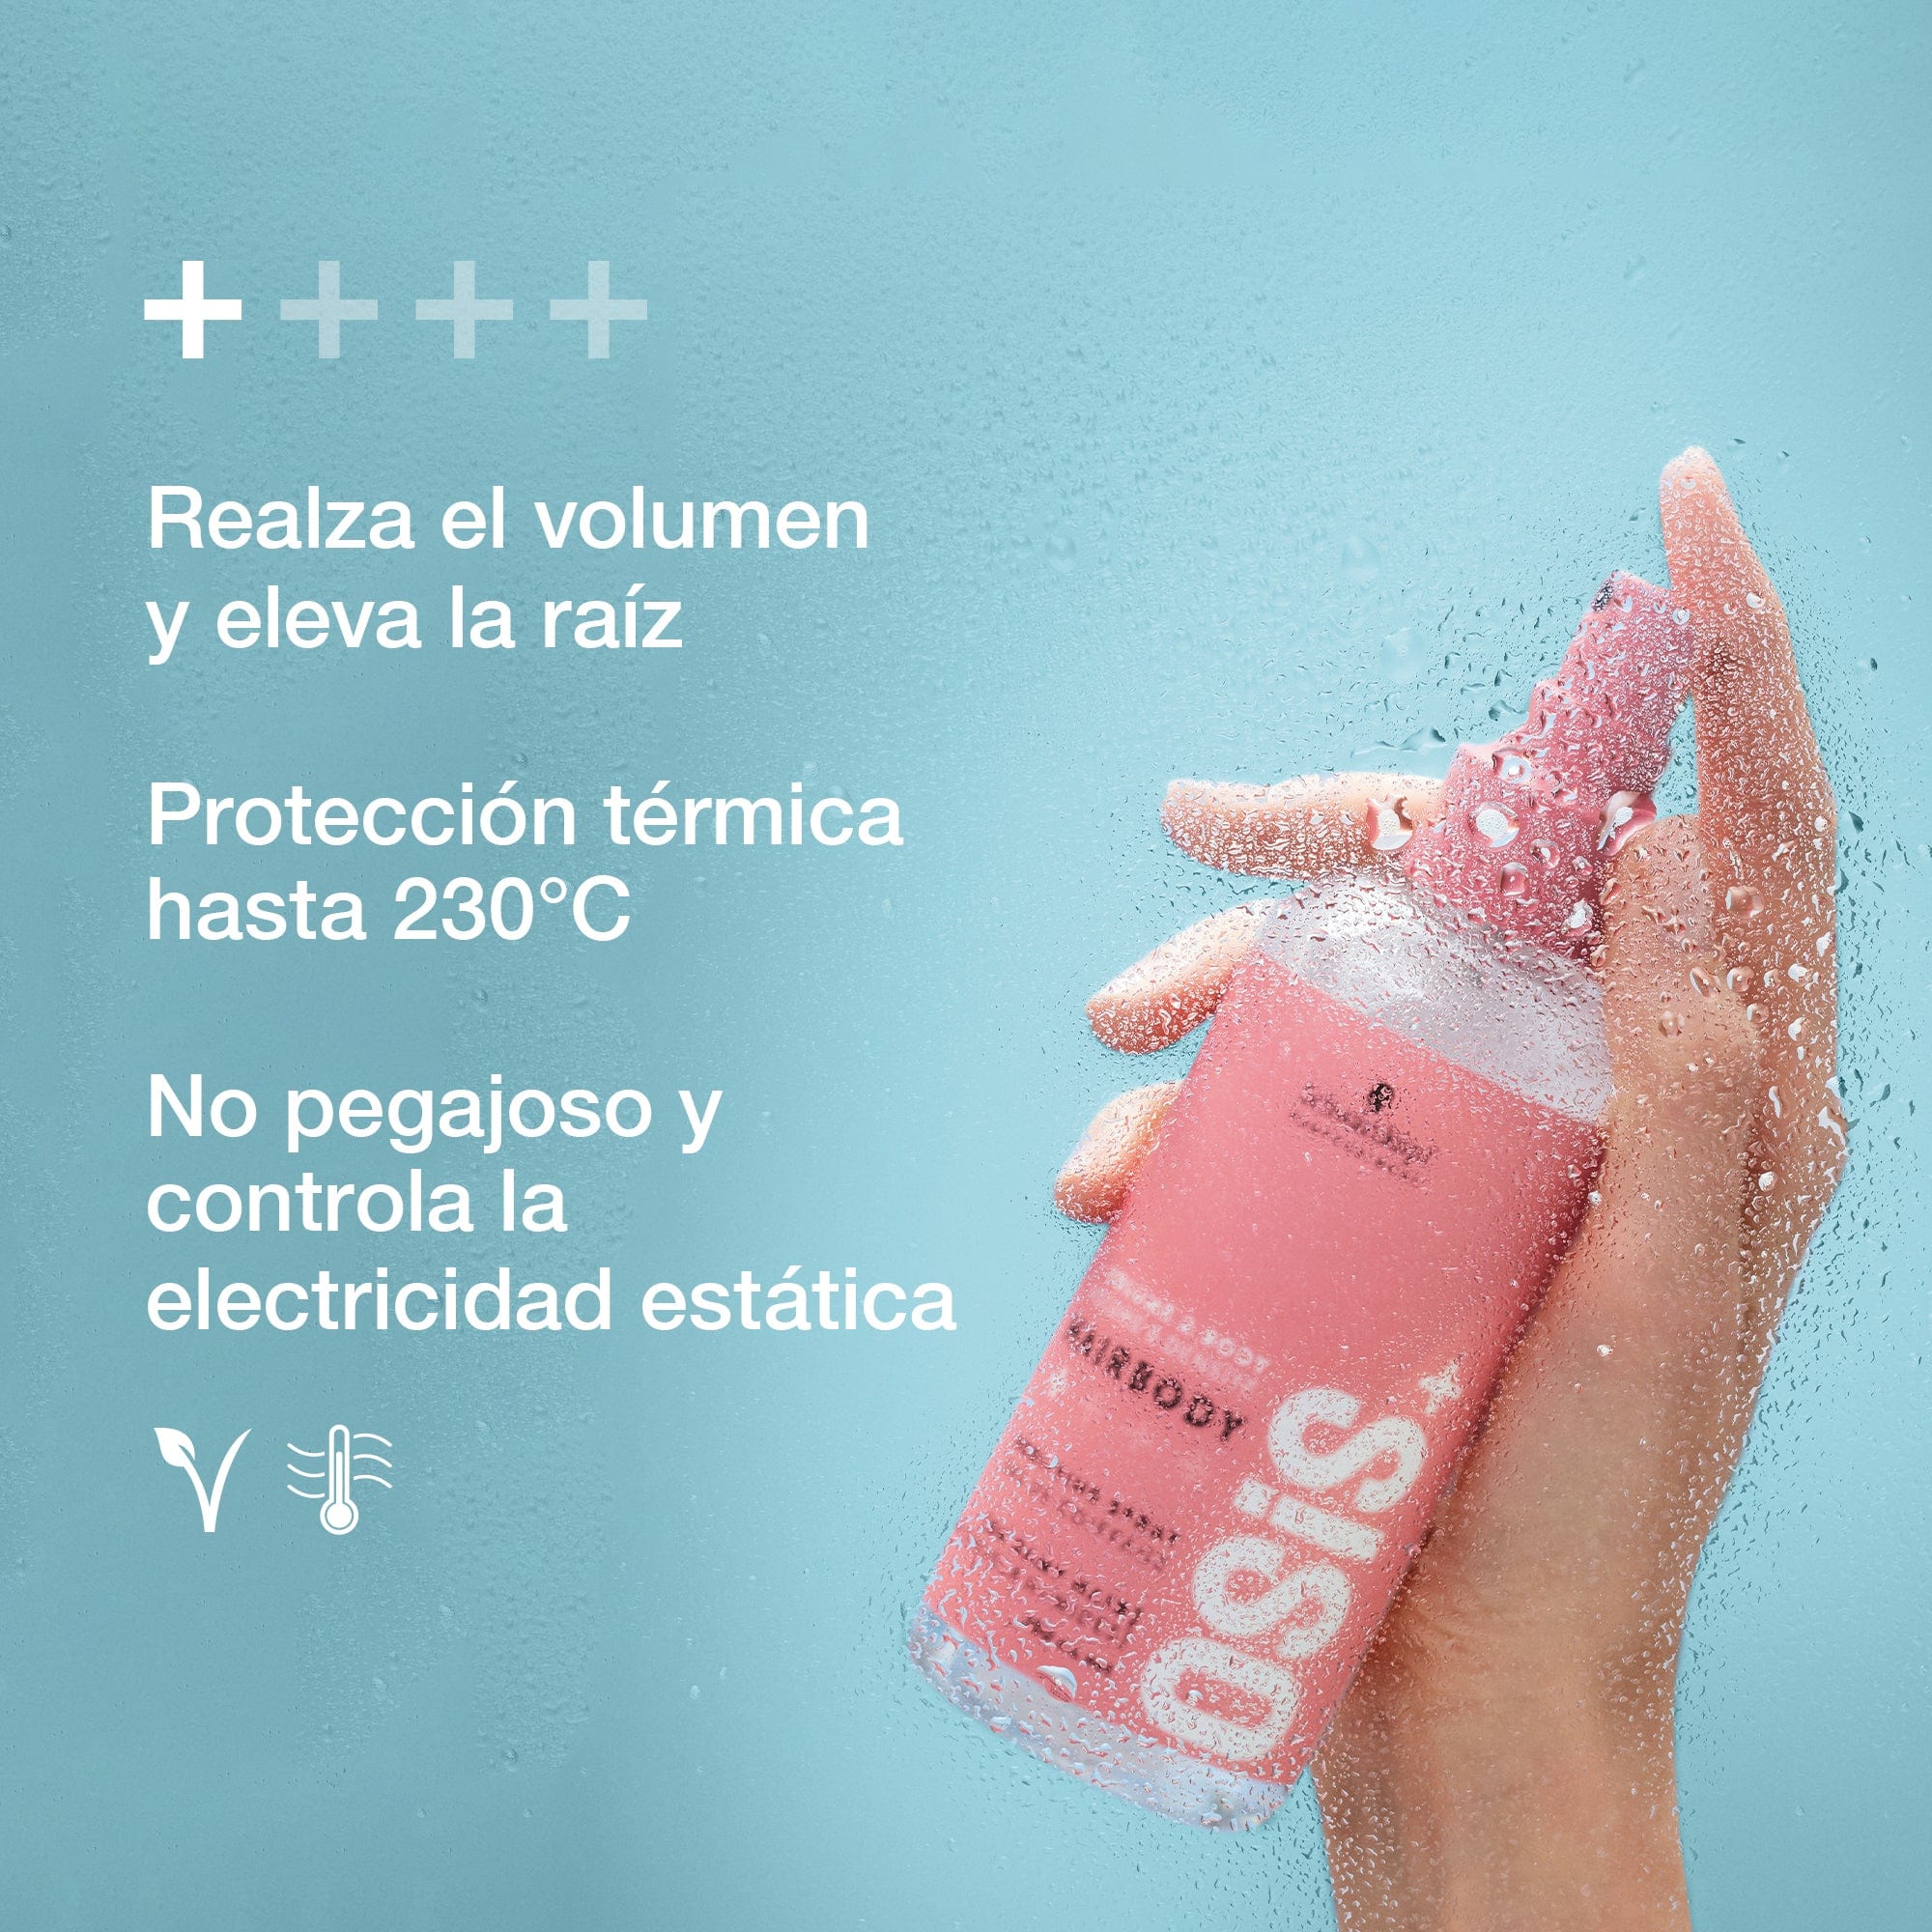 Osis Nuevo Hair Styling Products OSiS Hairbody 200ml Roberta Beauty Club Tienda Online Productos de Peluqueria